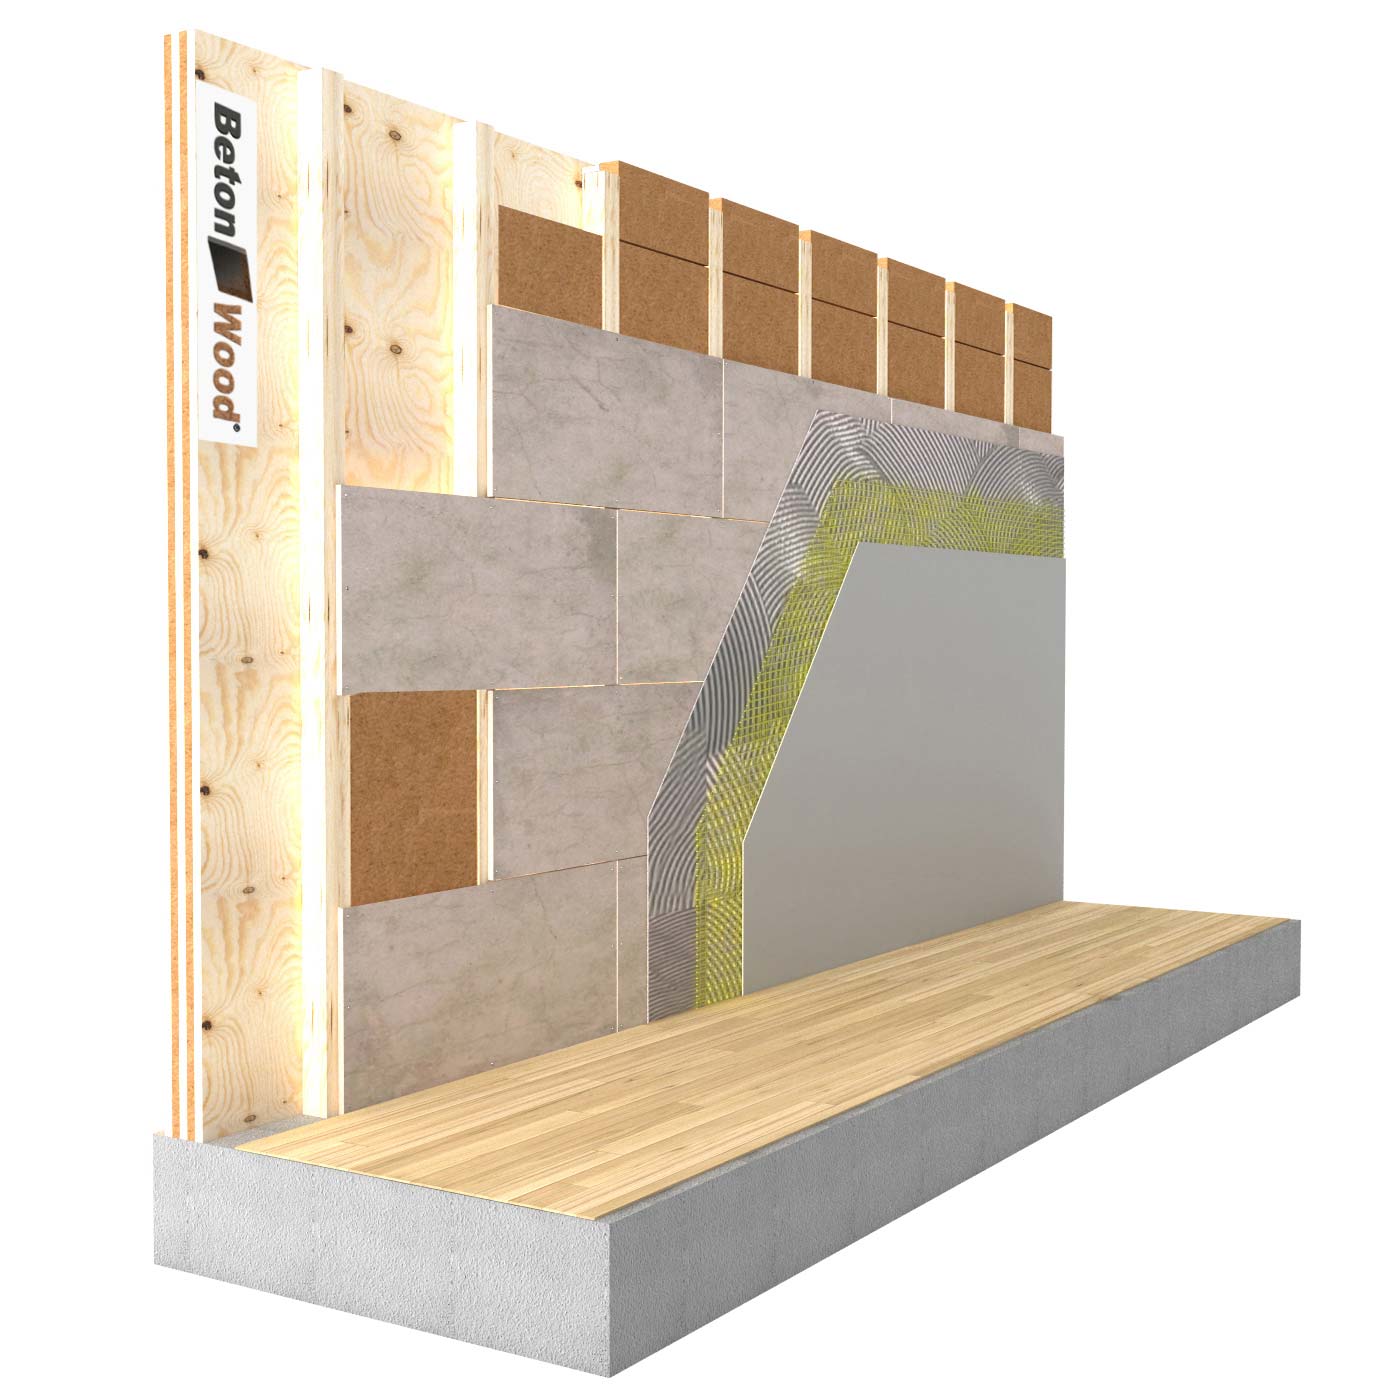 Internal insulation system in Protect Wood fiber and cement bonded particle board